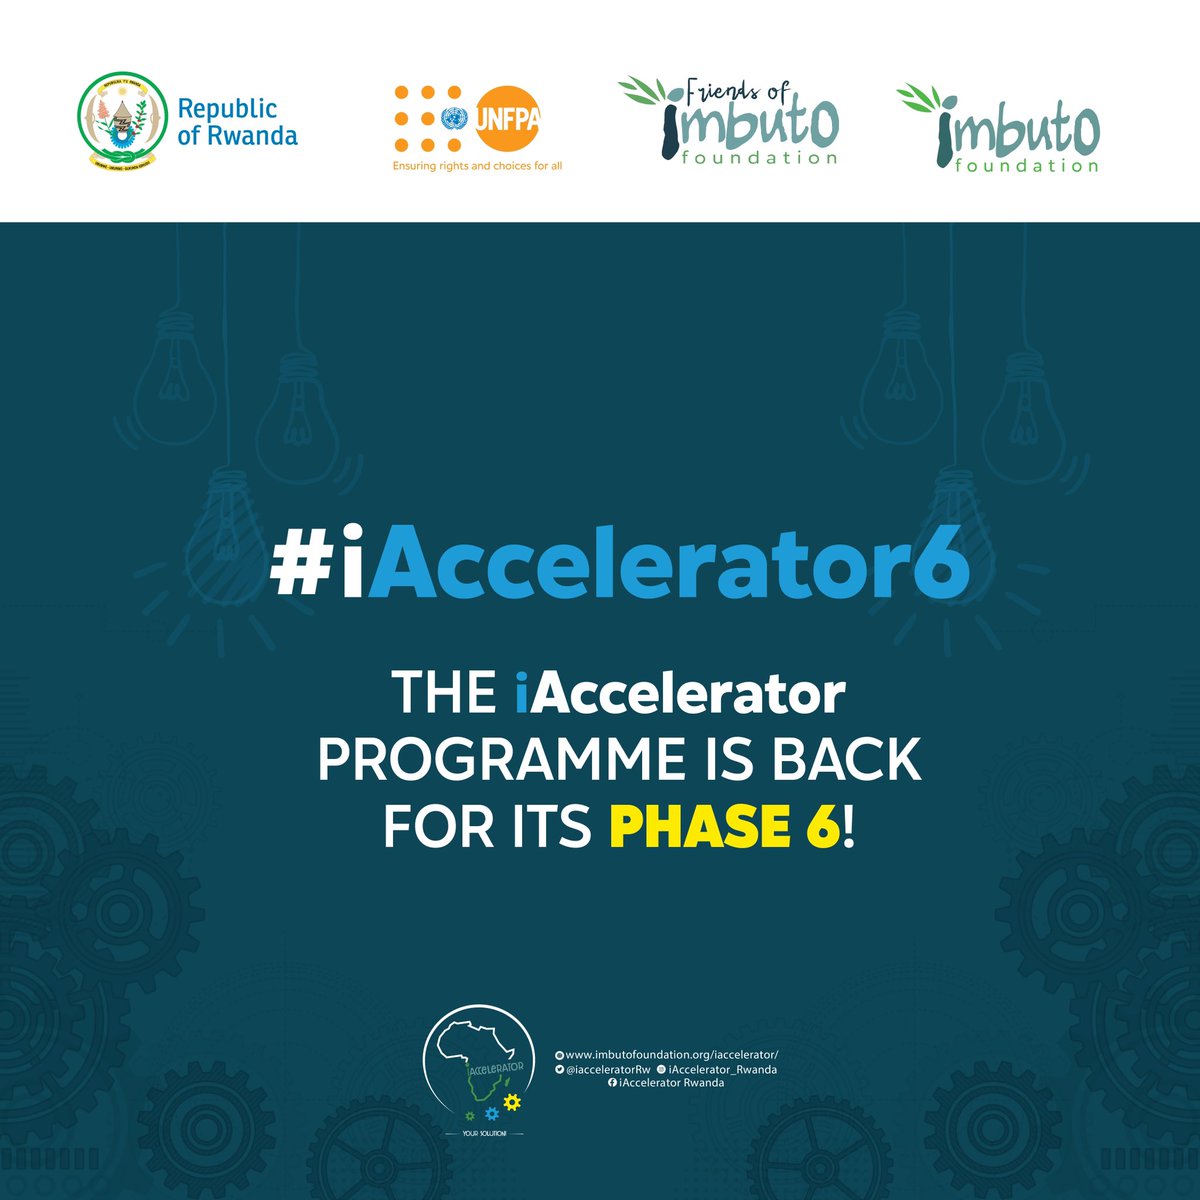 The Innovation Accelerator has returned for its 6th Phase! All aspiring entrepreneurs aged 18-30 with creative and innovative solutions with the potential to impact the country have the chance to win 10 Million Rwf in seed funding and business training mentorship! Stay tuned!